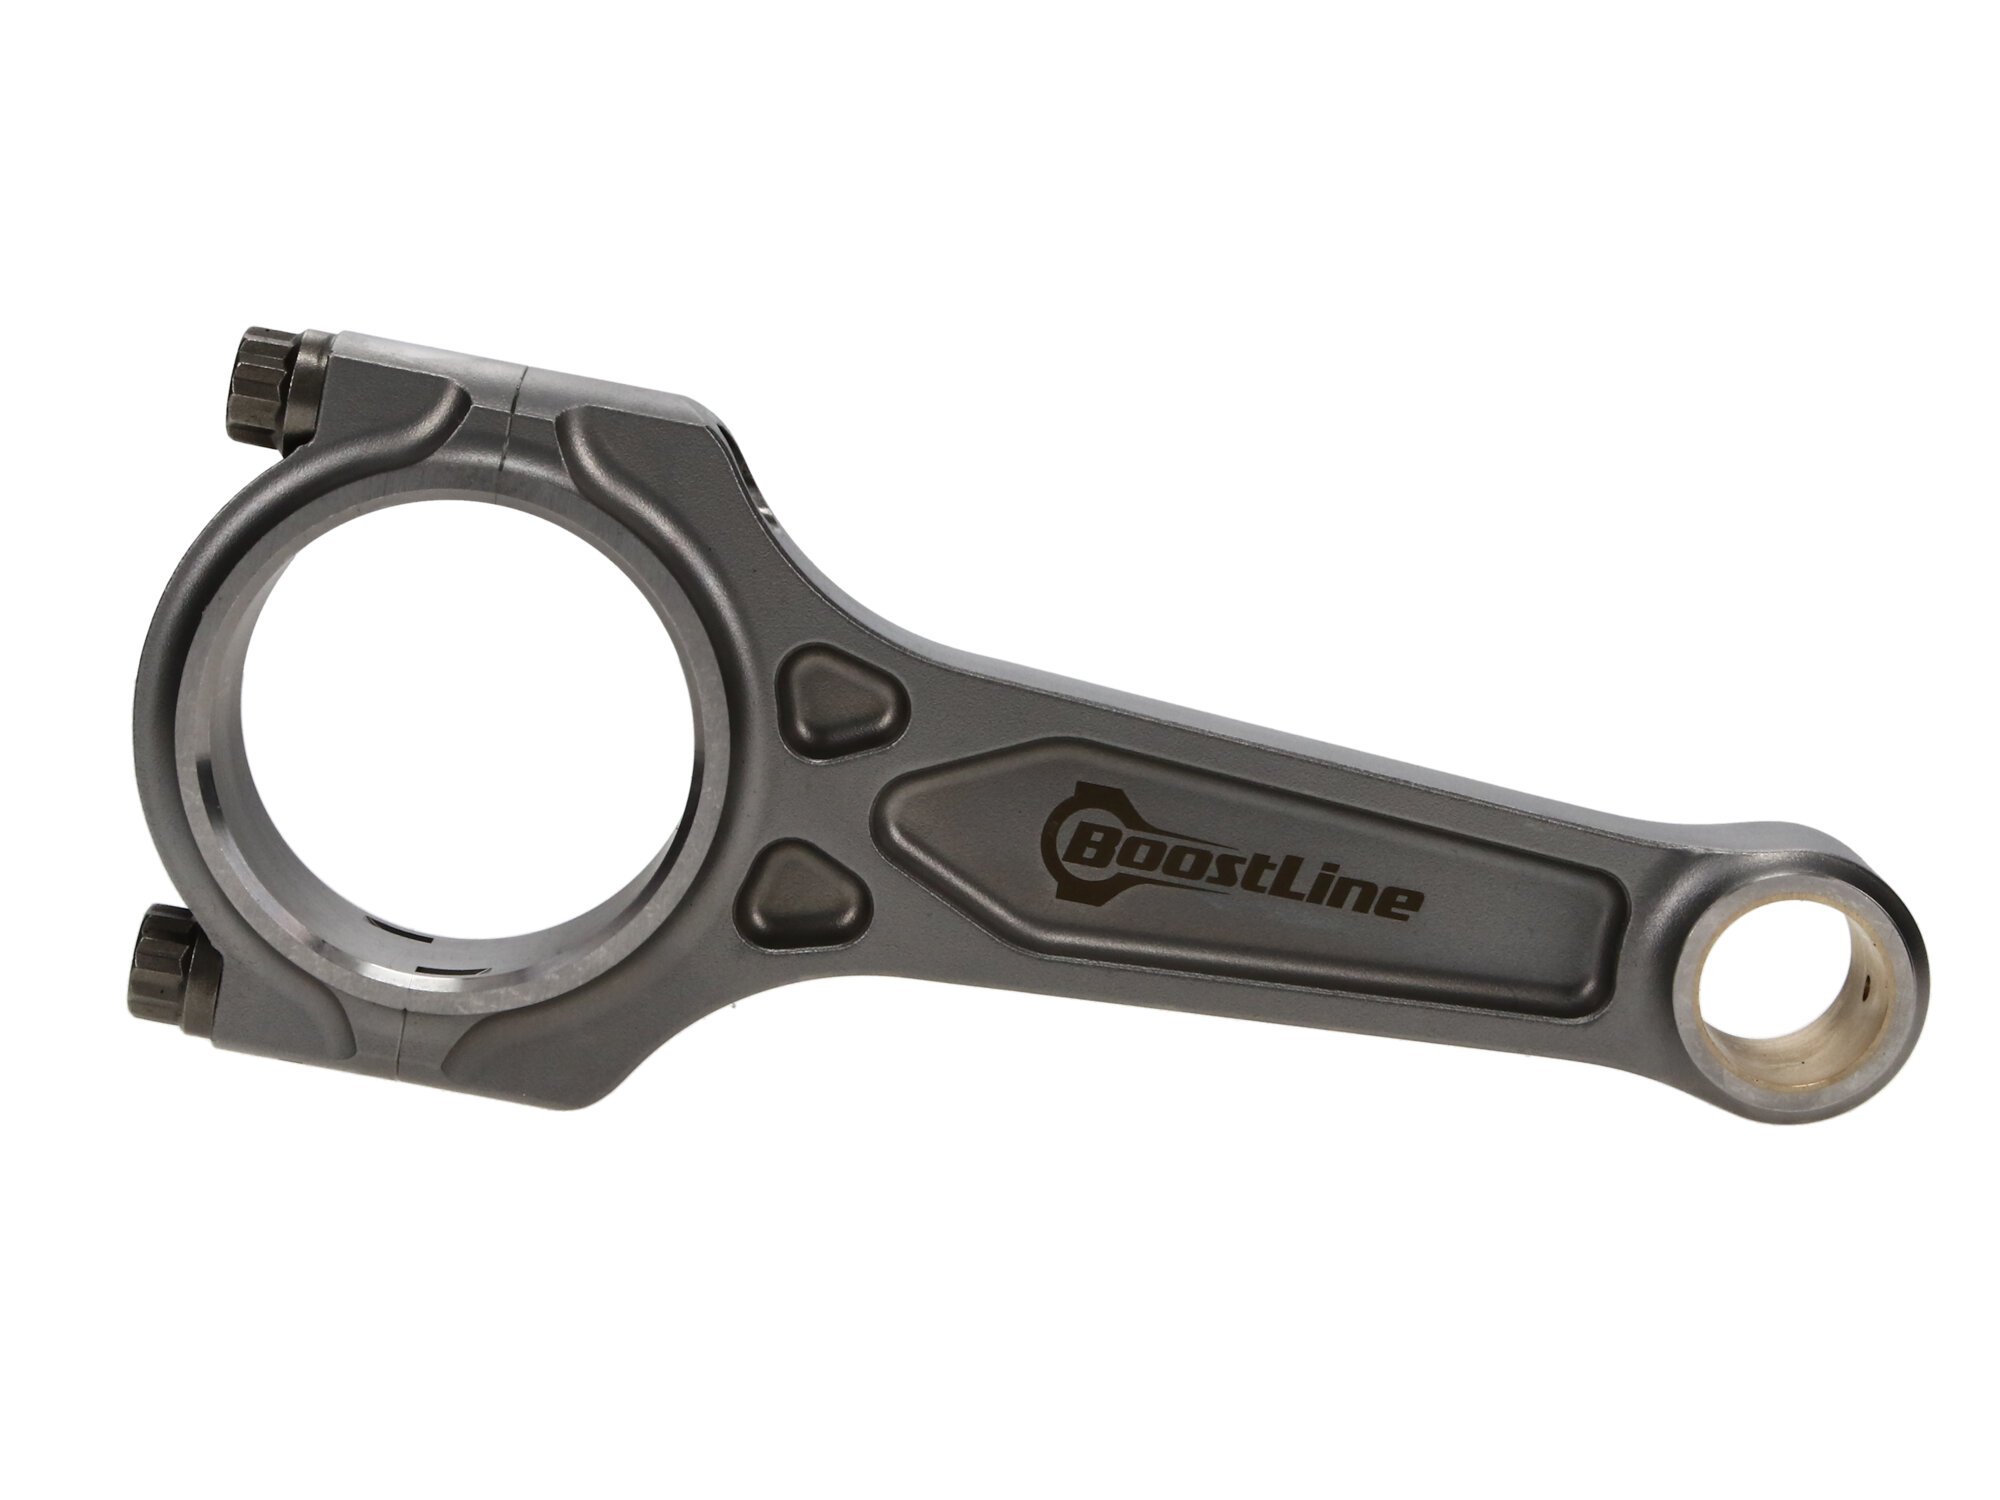 Ford, Modular 4.6L, 5.933 in. Length, Connecting Rod